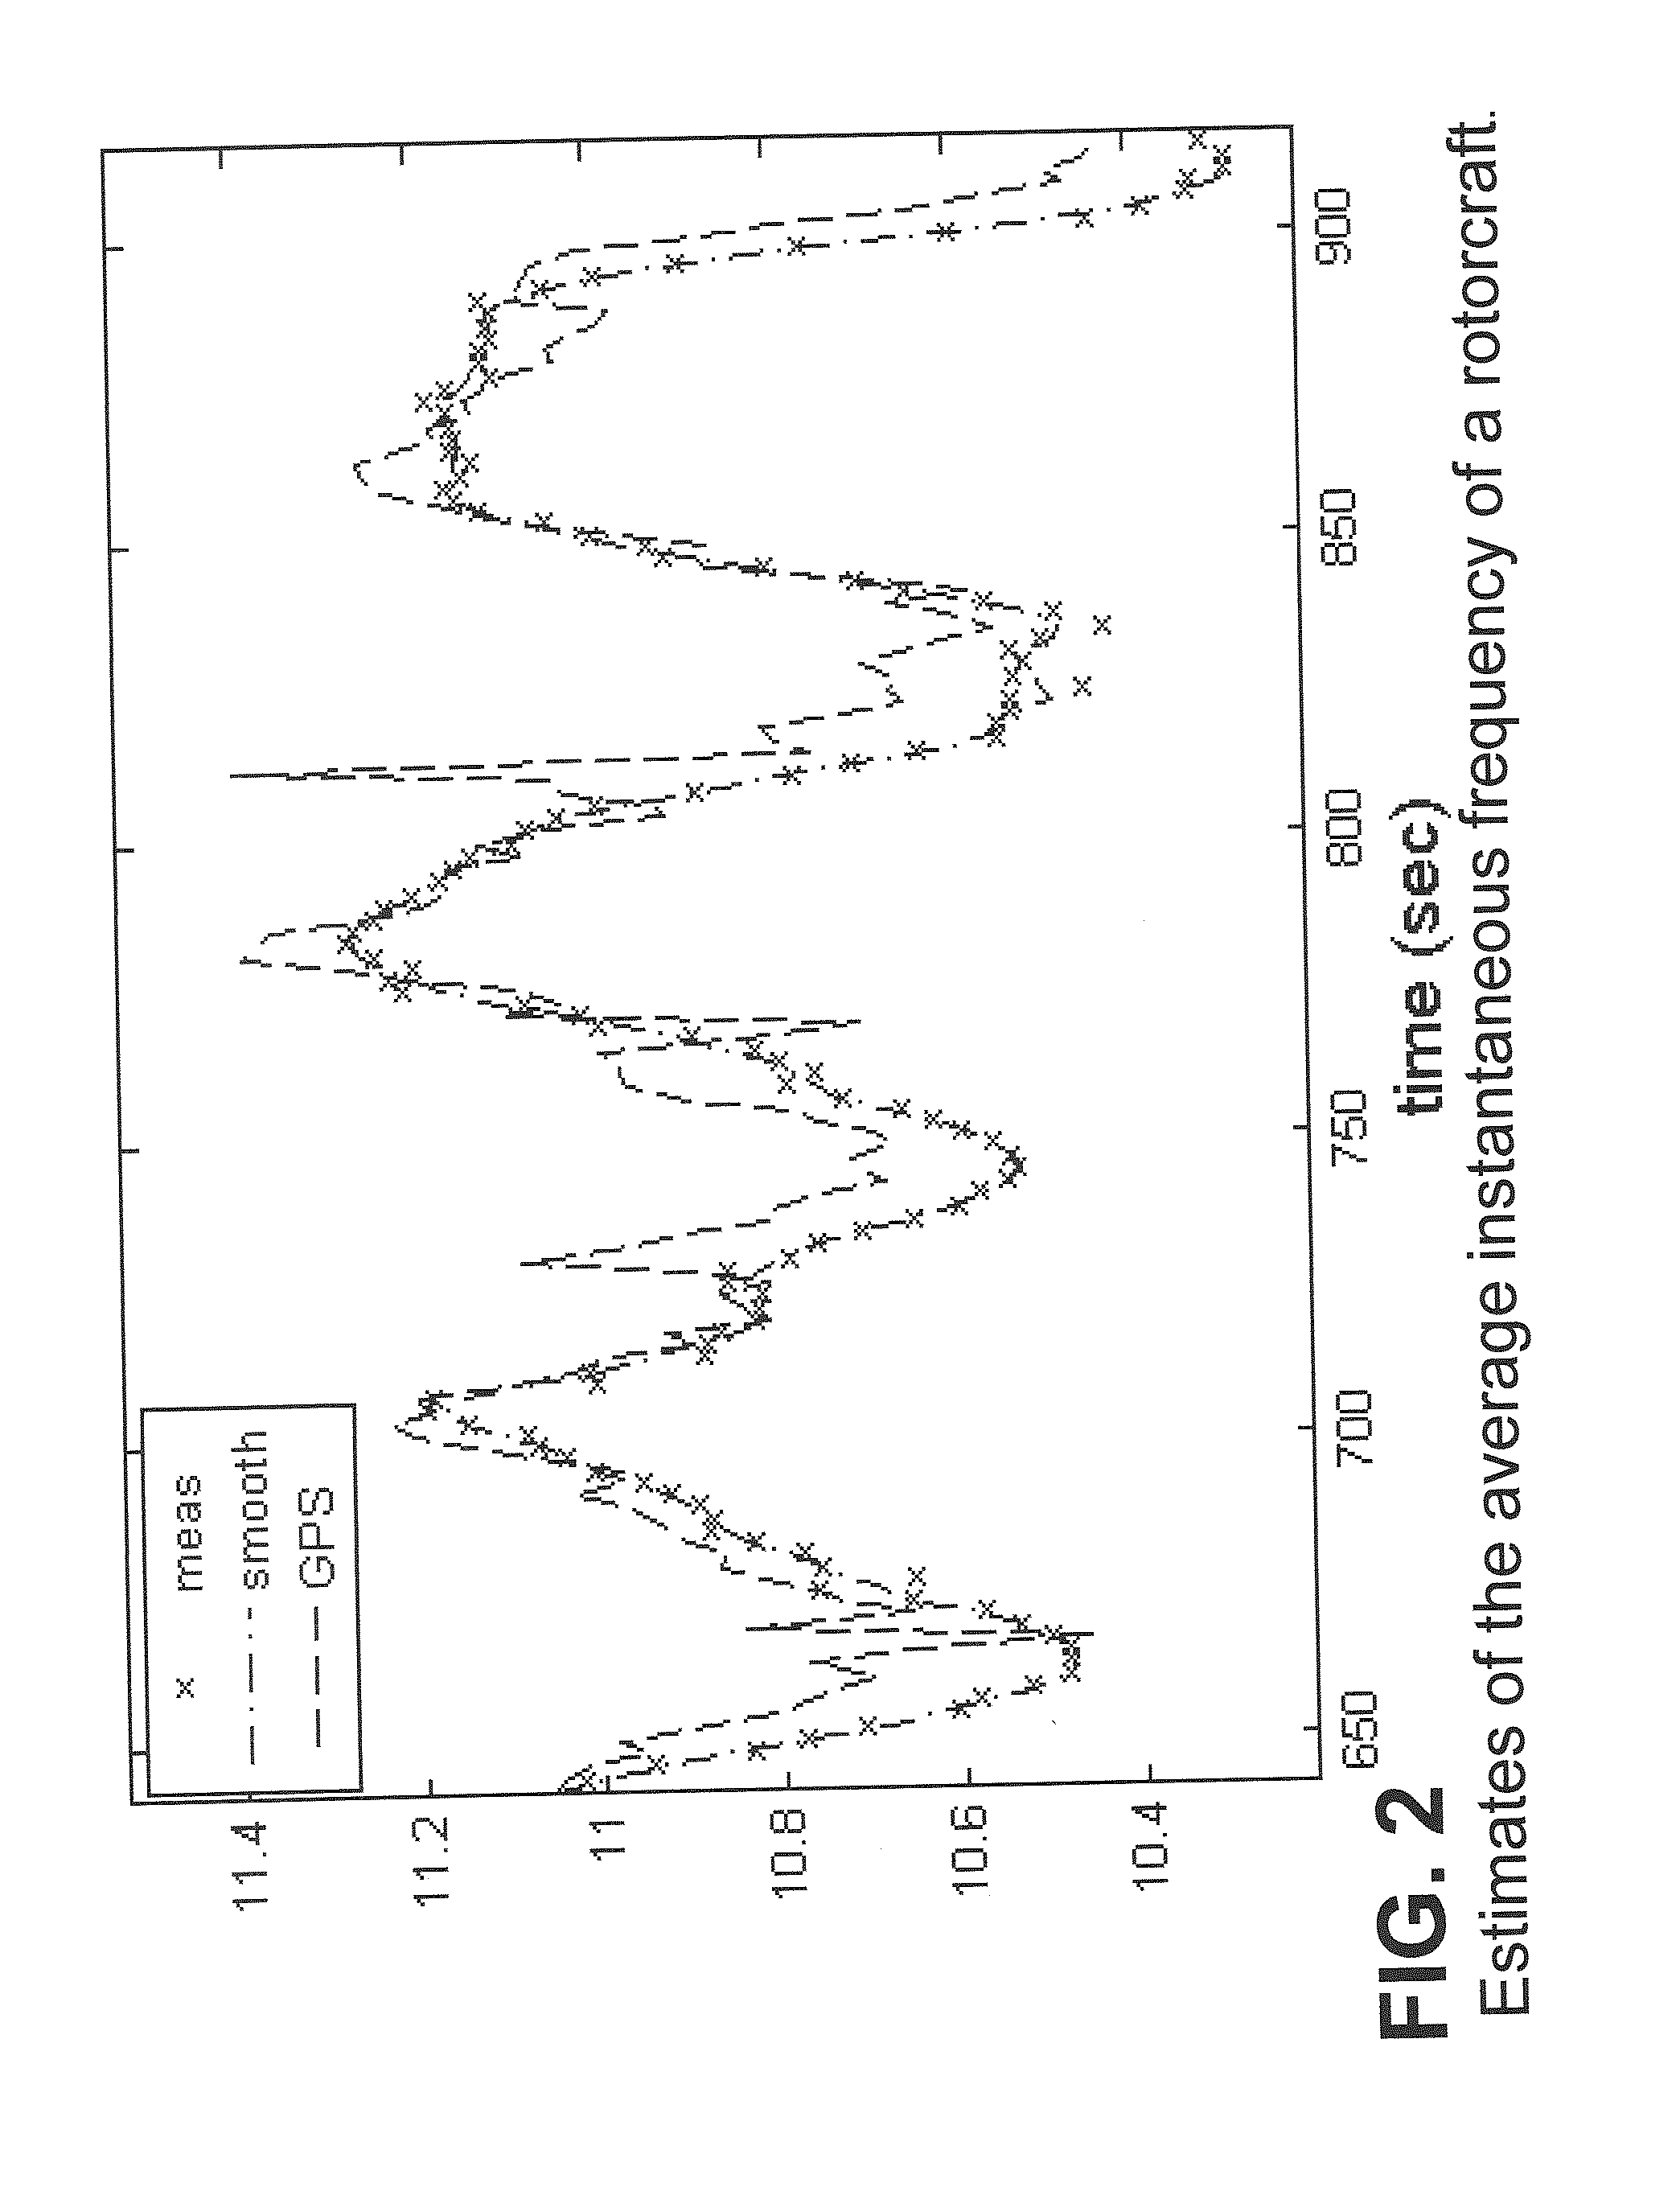 Method and system for motion compensated target detection using acoustical focusing